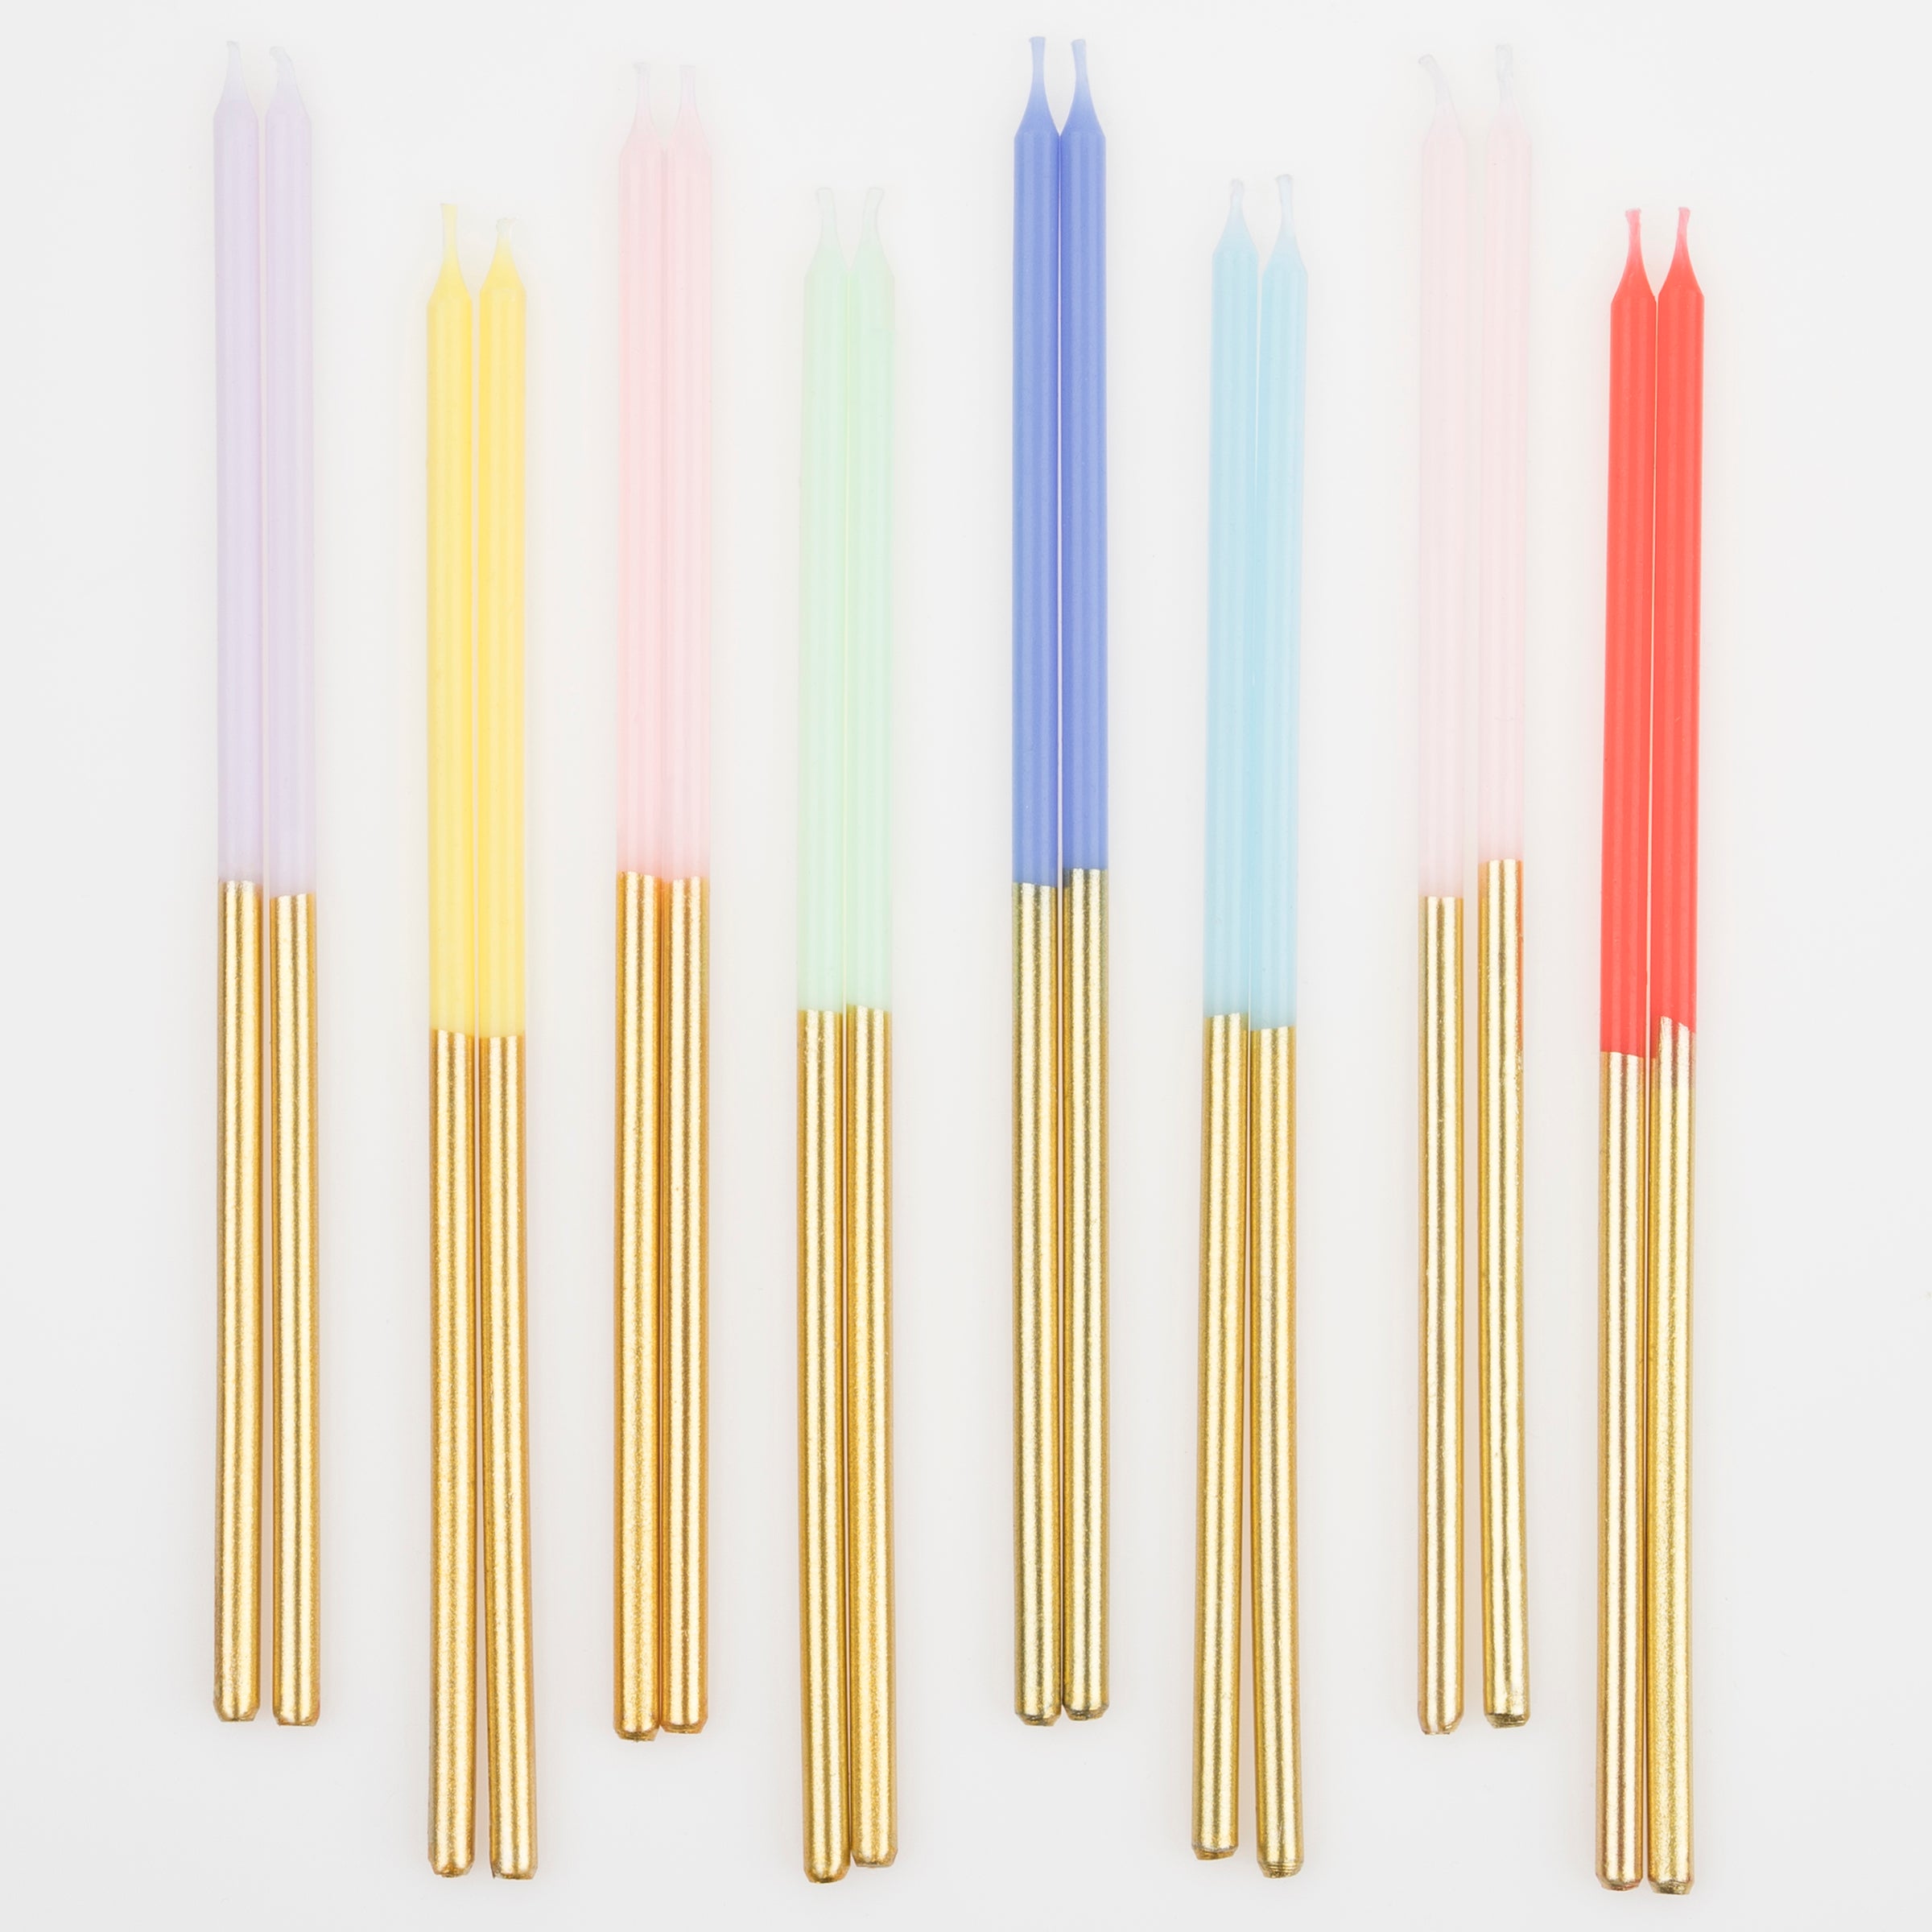 These gold candles are teamed with a rainbow of colors, ideal for a pride cake or birthday cake decorations.